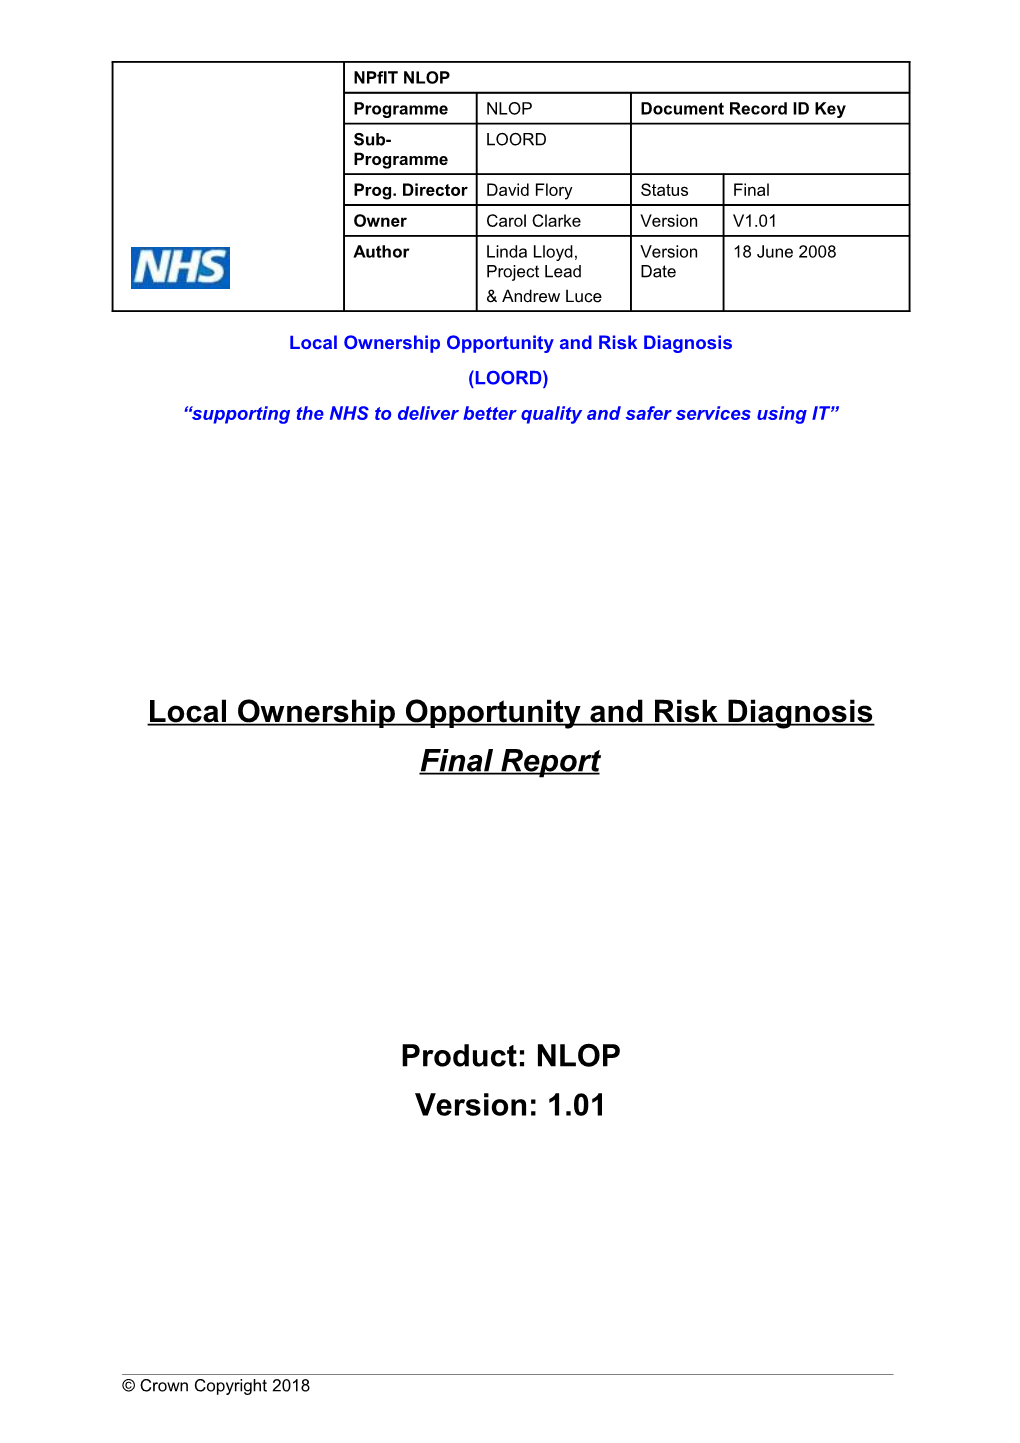 Local Ownership Opportunity and Risk Diagnosis